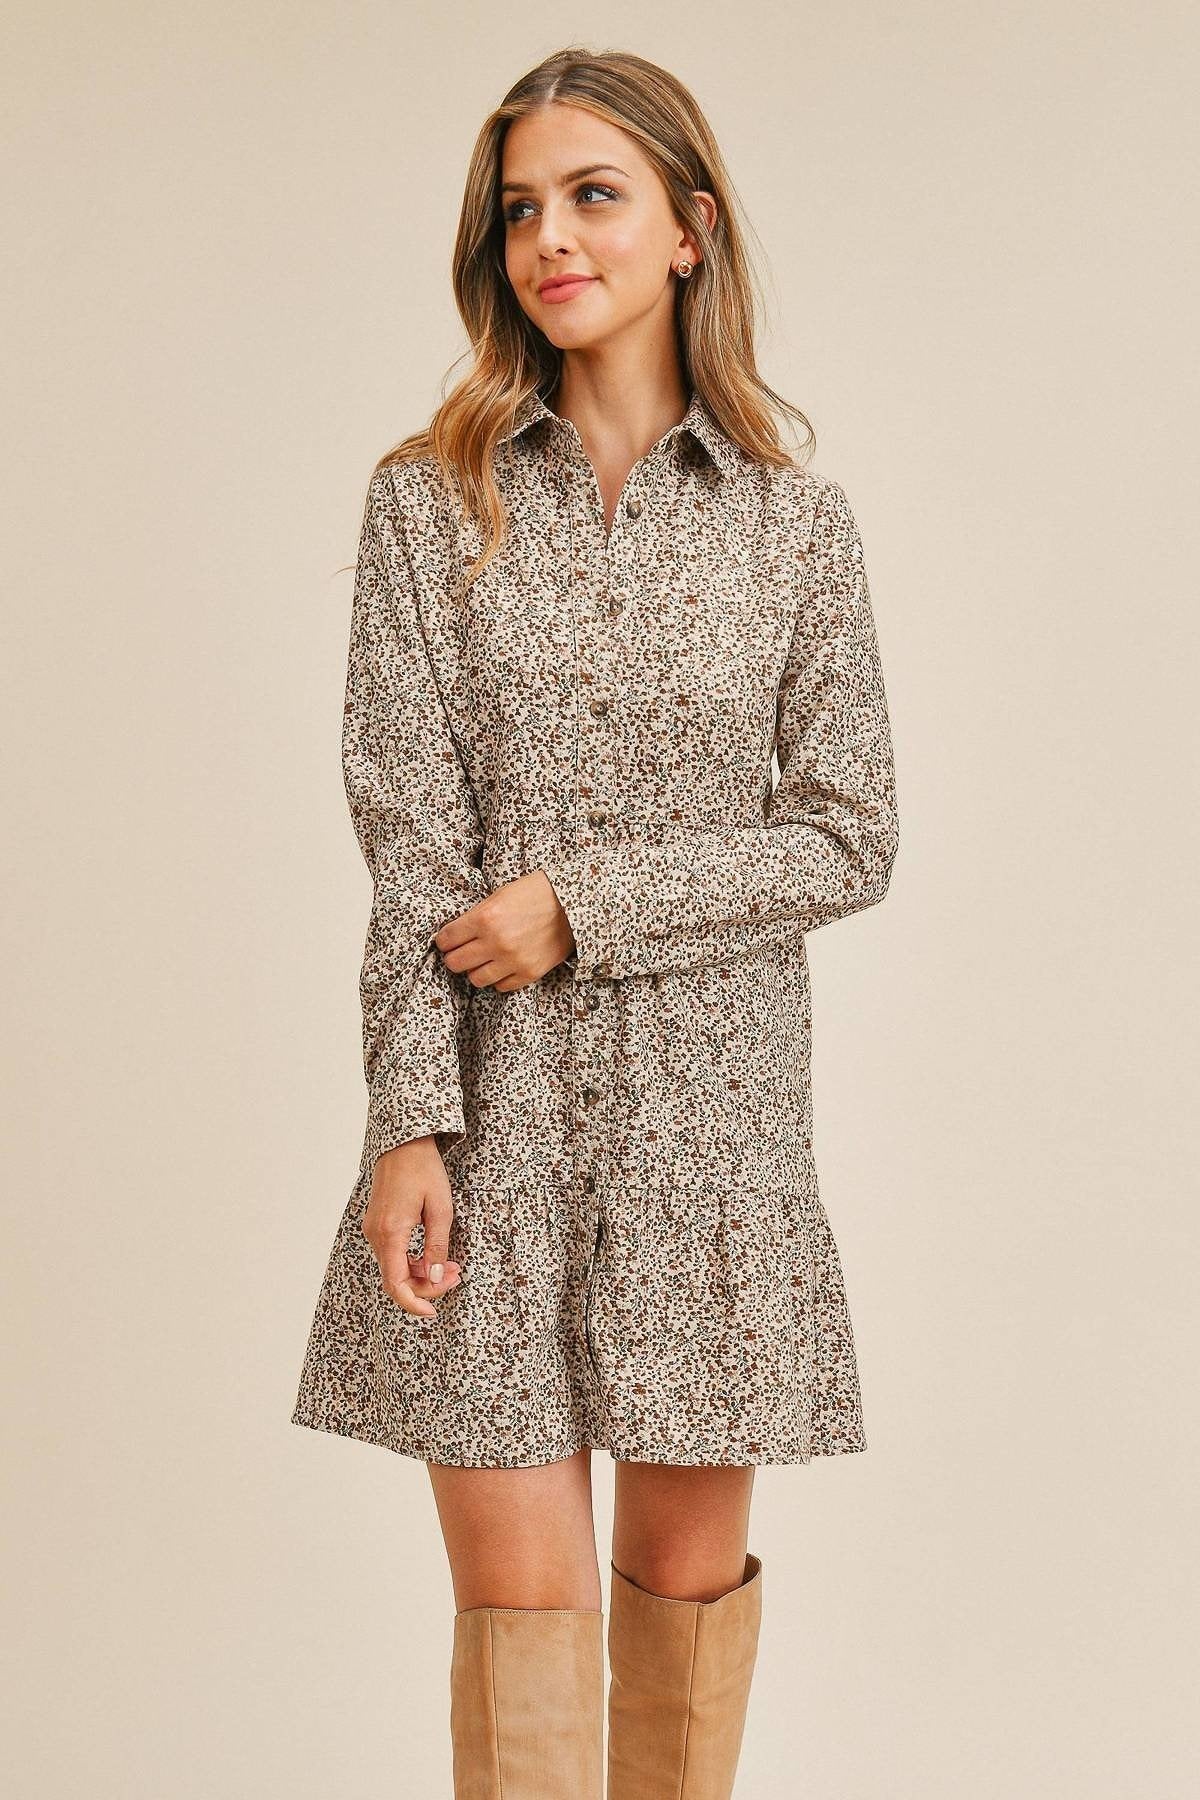 Corduroy Printed Button Down Front Collar Long Sleeve Dress_ Dresses jehouze 